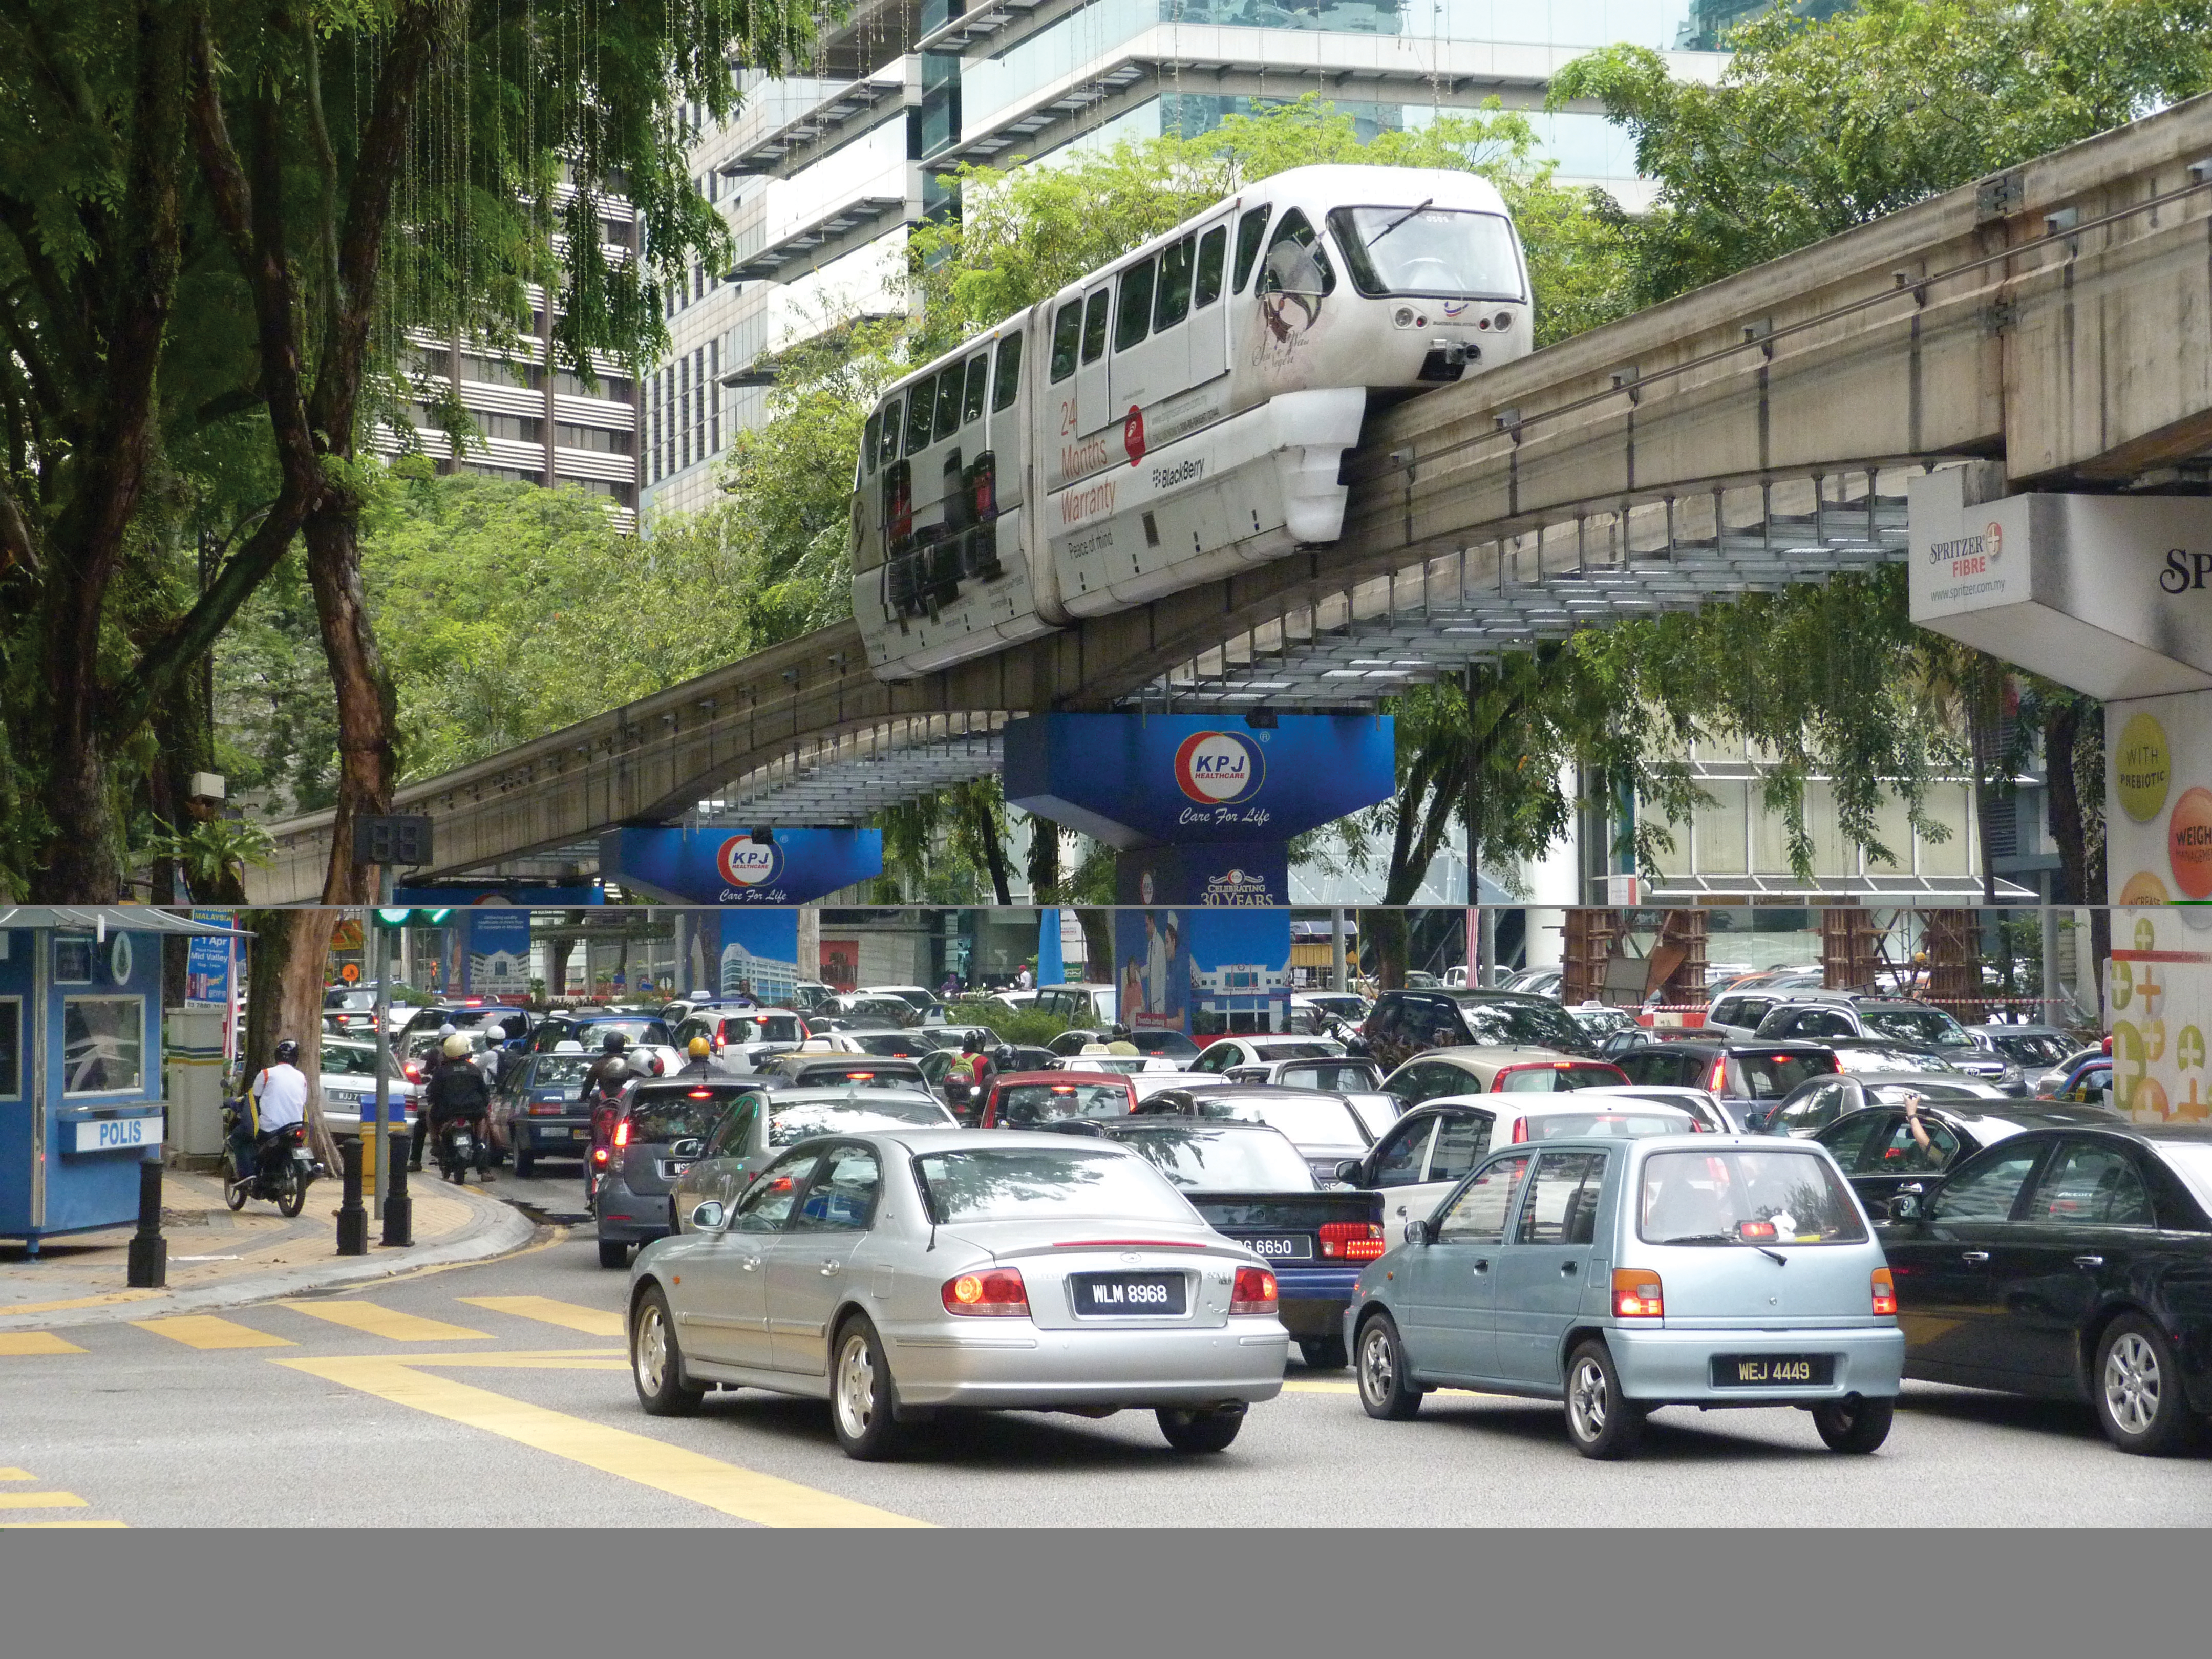 KL's iconic monorail